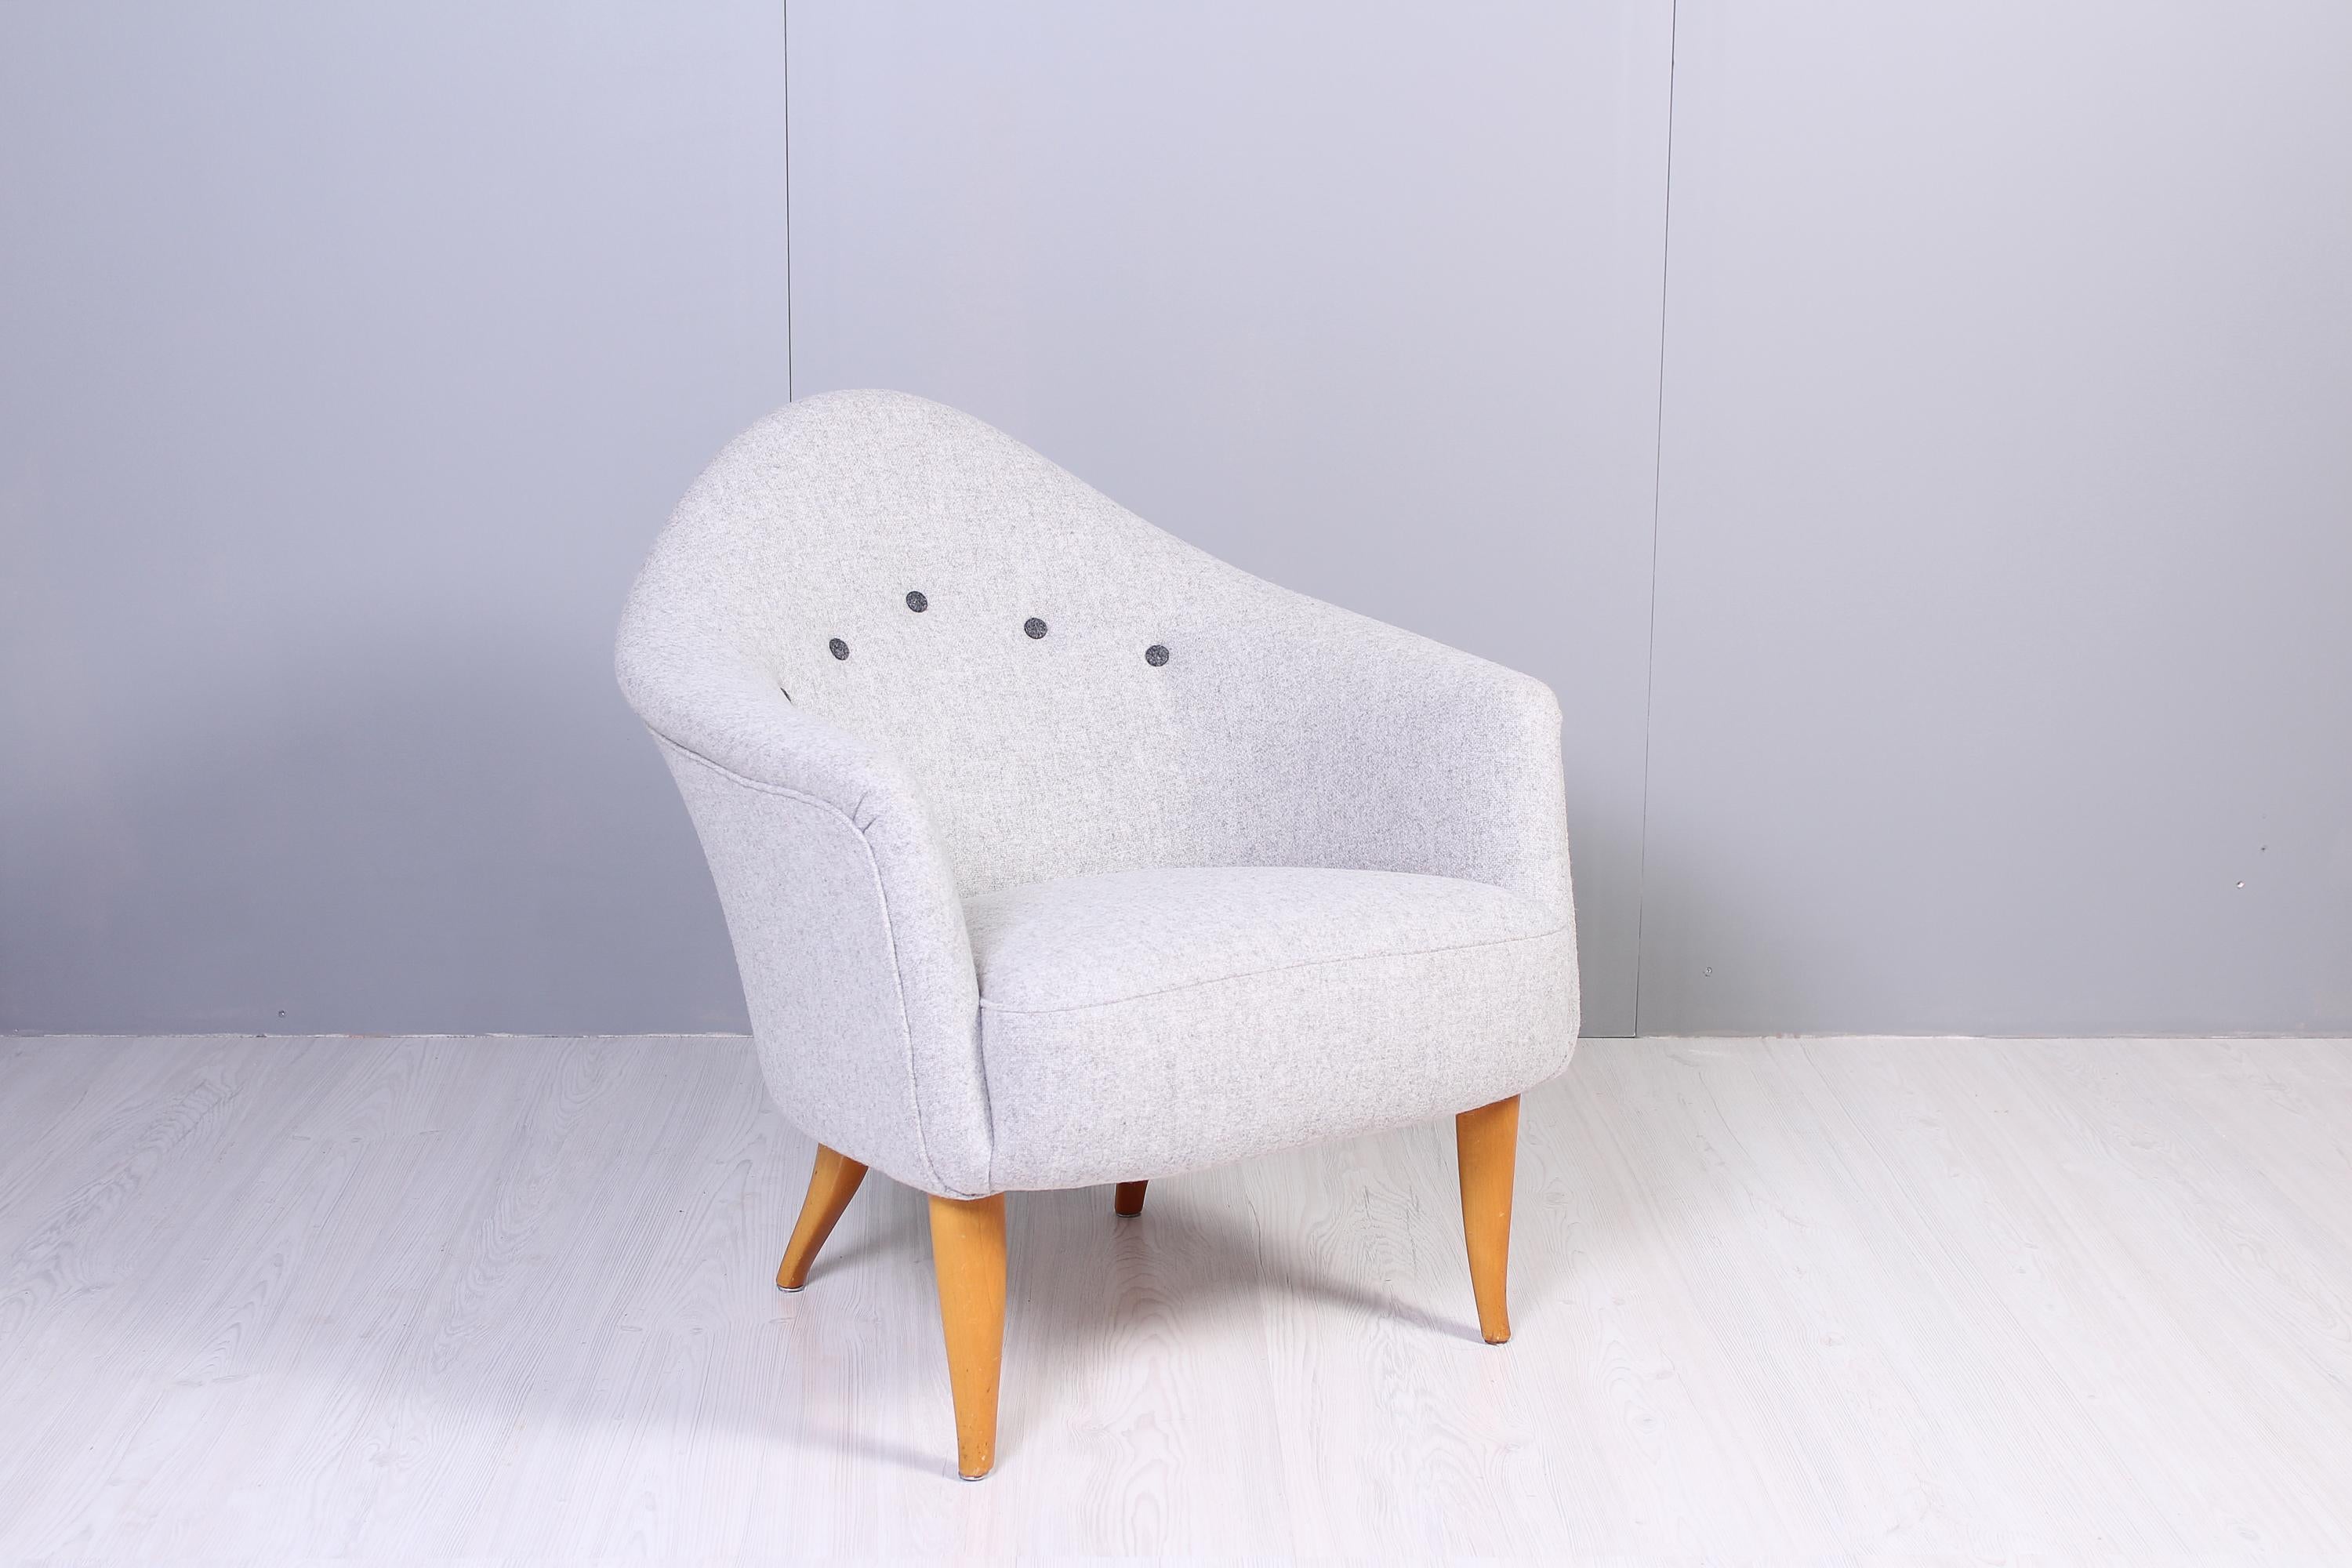 This chair was designed by Kerstin Hörlin-Holmquist in the late 1950s for Nordiska Kompaniet in Sweden. This design classic was a part of a series called Paradiset. The chair has been reupholstered in a Kvadrat fabric from Hallingdal with